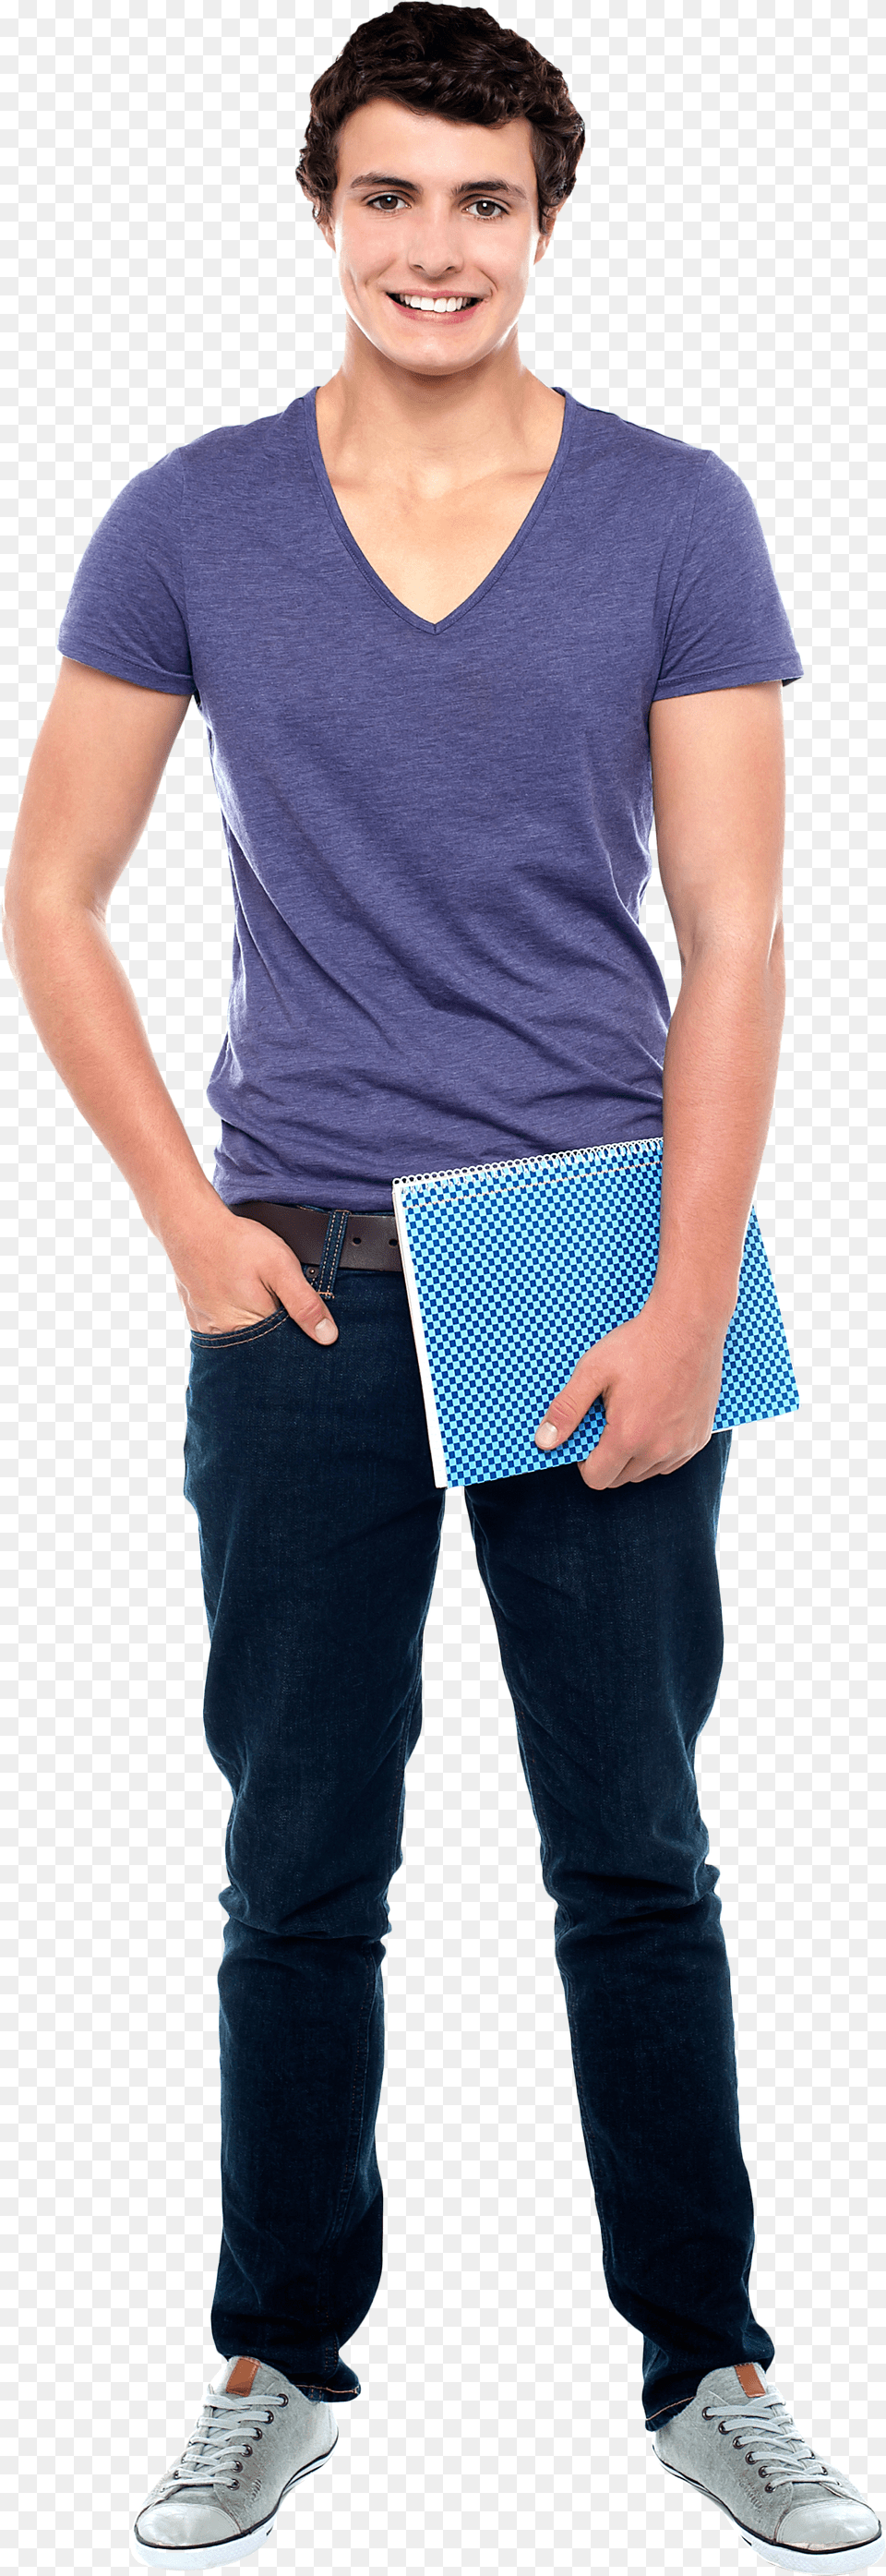 Student Free Image People In Blue T Shirt Transparent Background Png